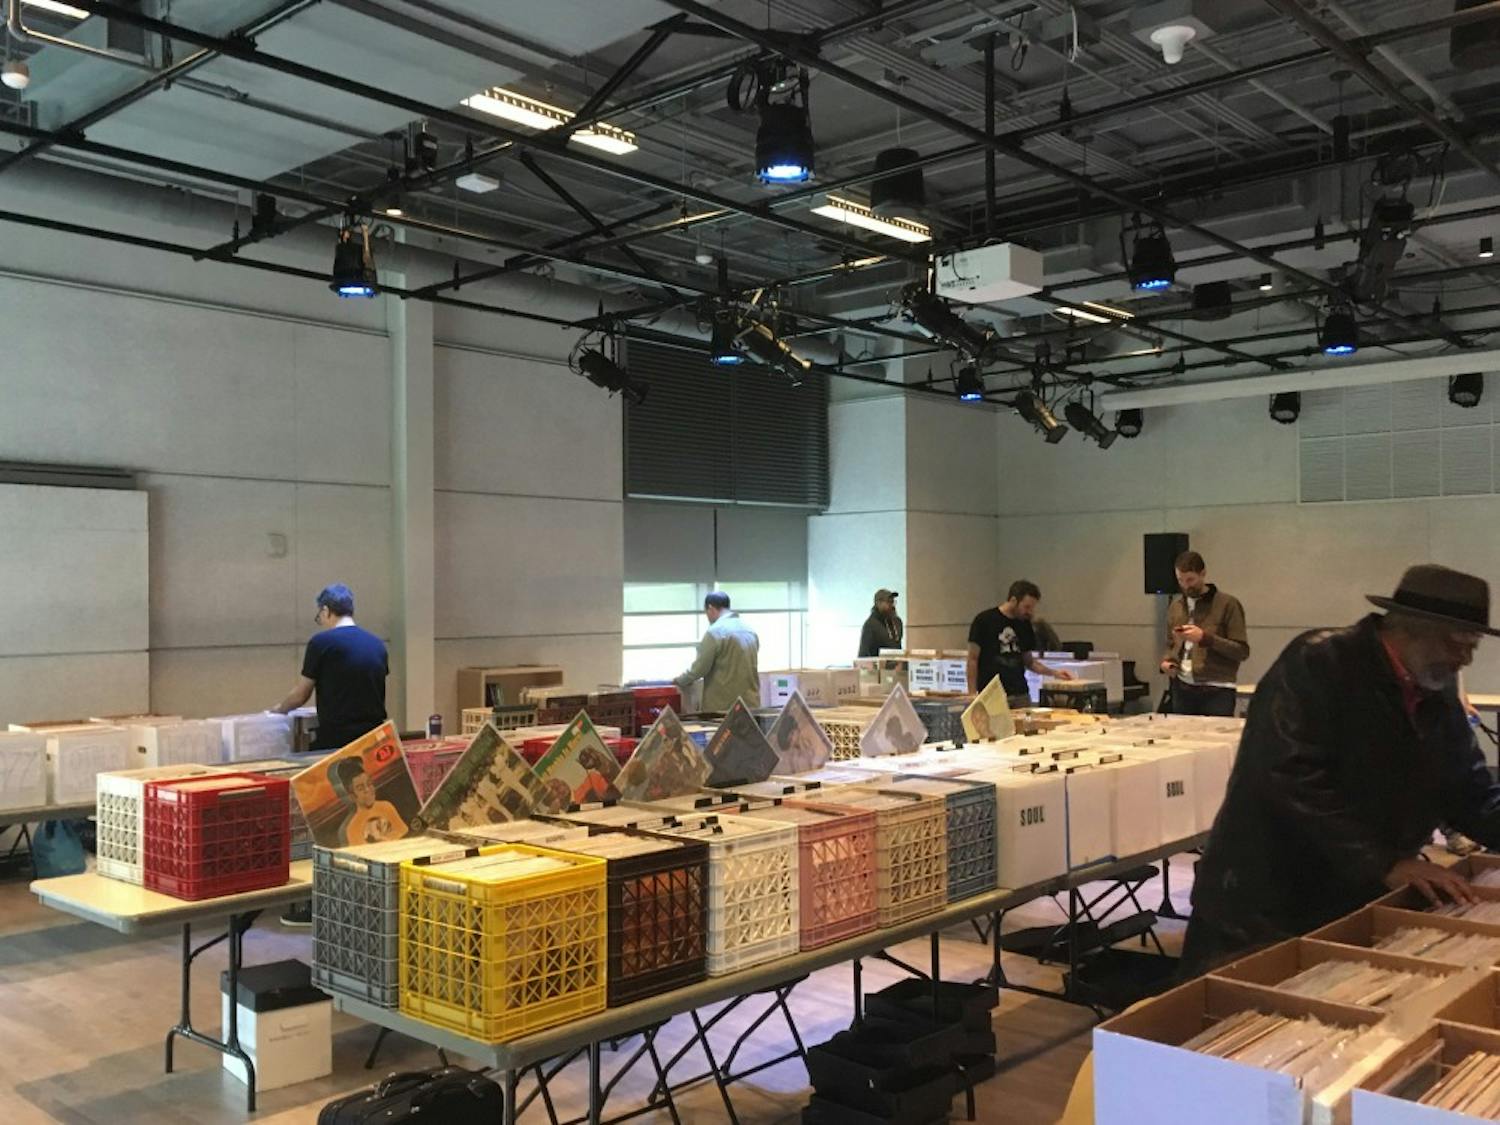 WXDU’s series of record fairs has been running since 2005. Last year’s Fall Record Fair, pictured, was the first held in the Rubenstein Arts Center.